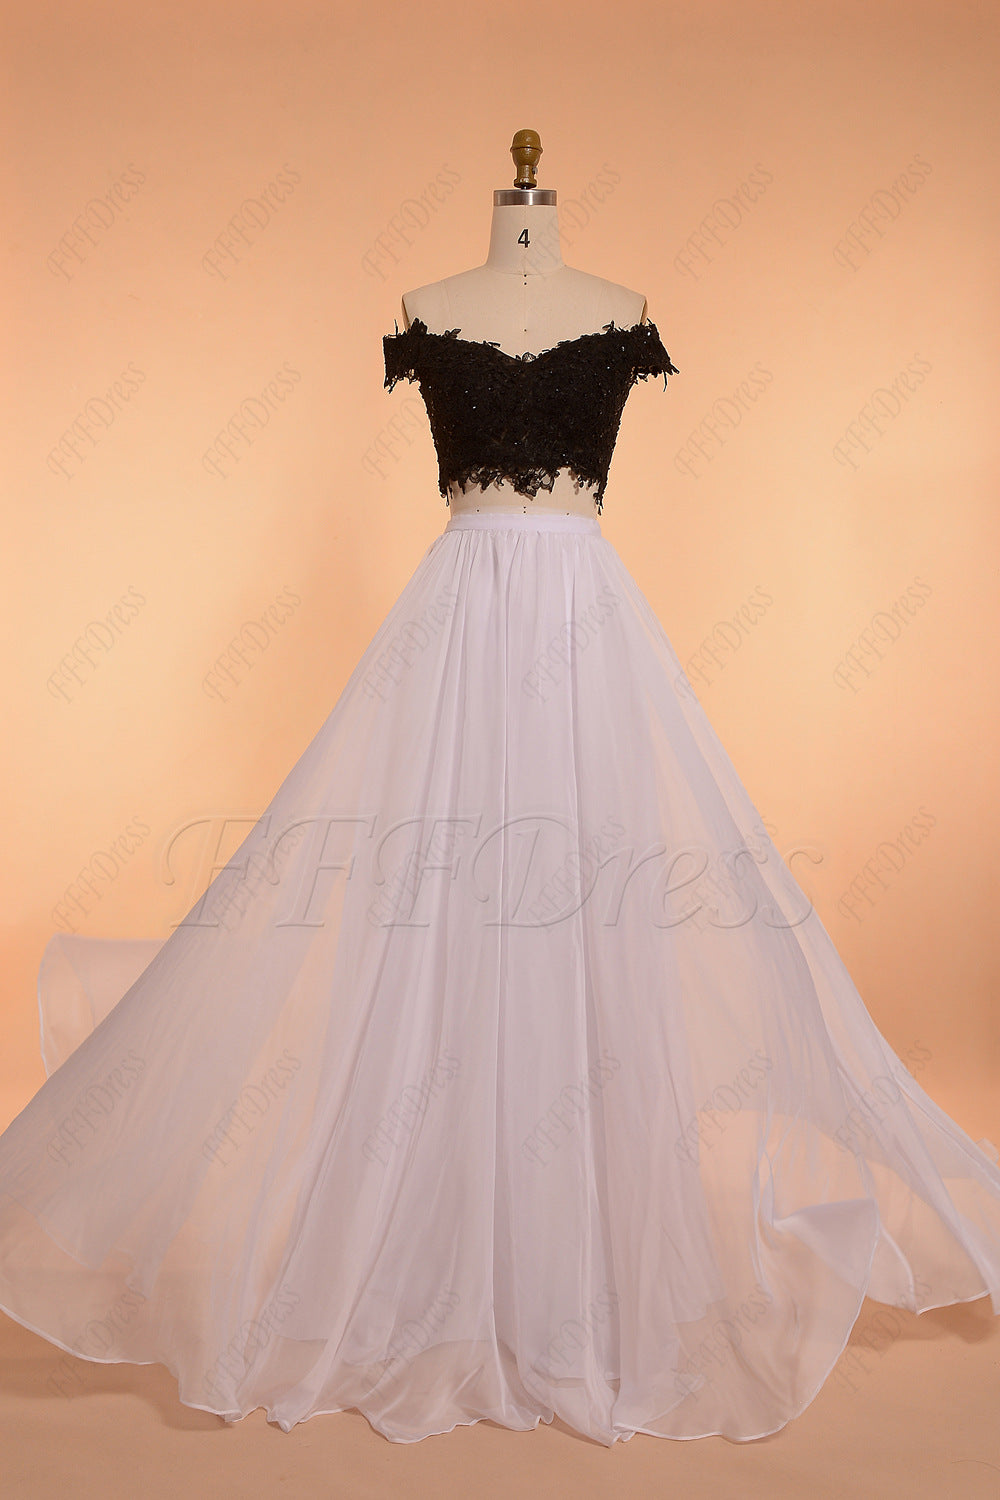 Black and White Off the Shoulder Long Prom Dresses